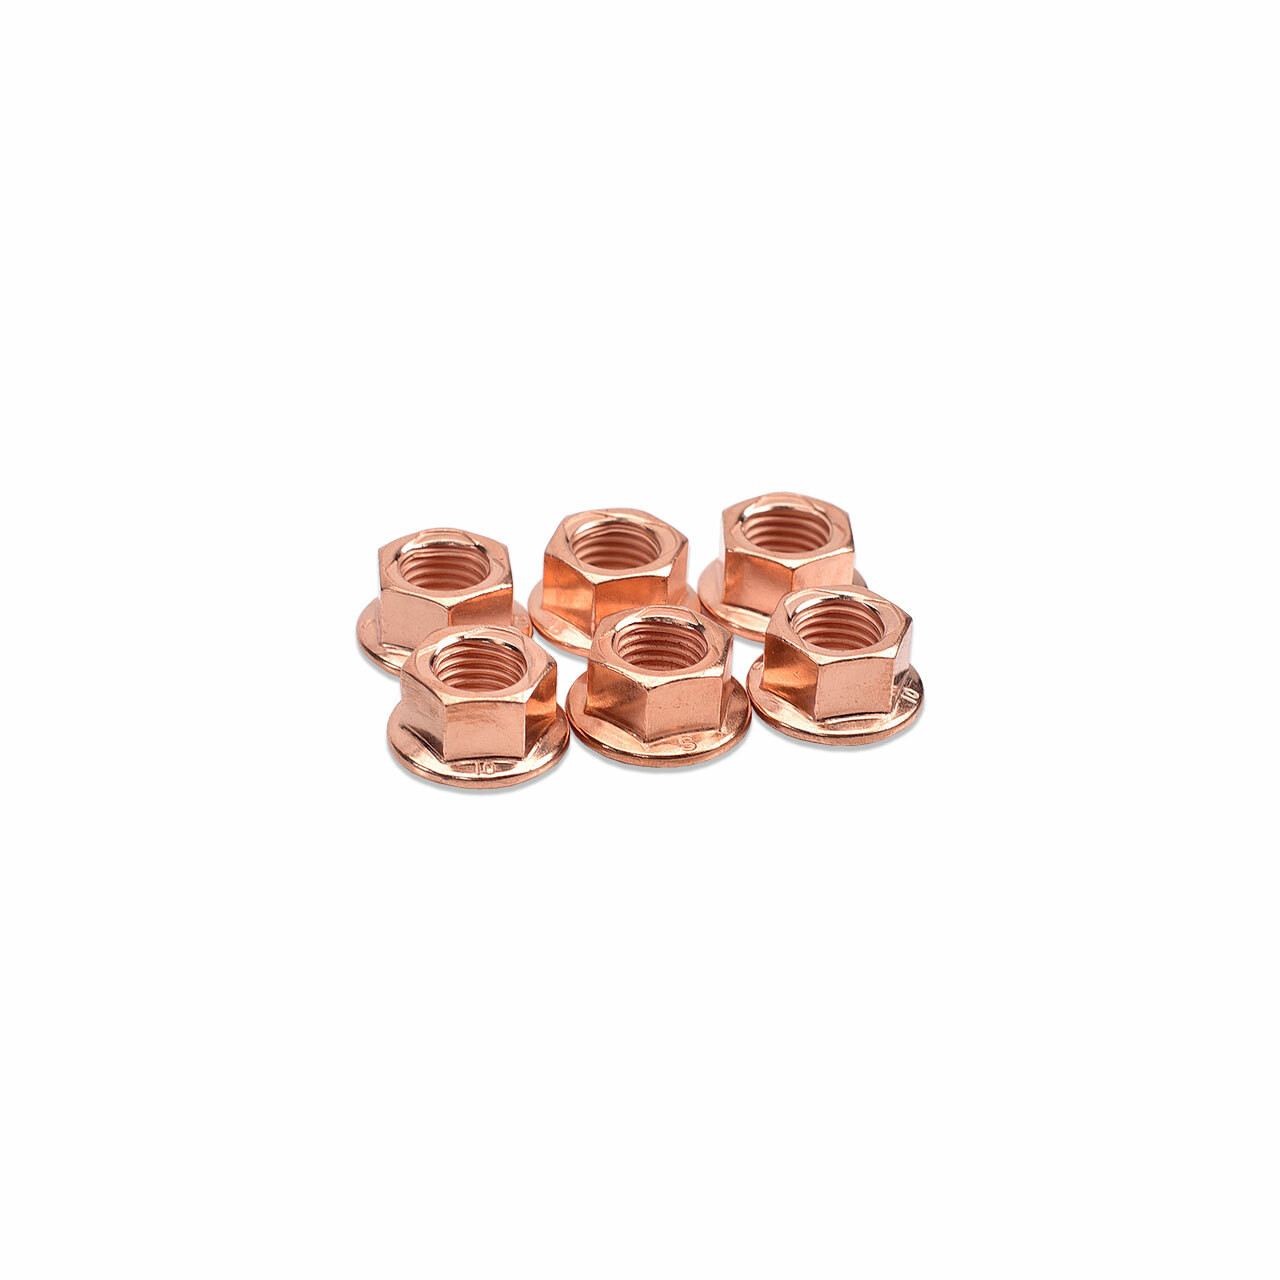 M10 15mm Socket Copper Exhaust Downpipe Turbo Nuts